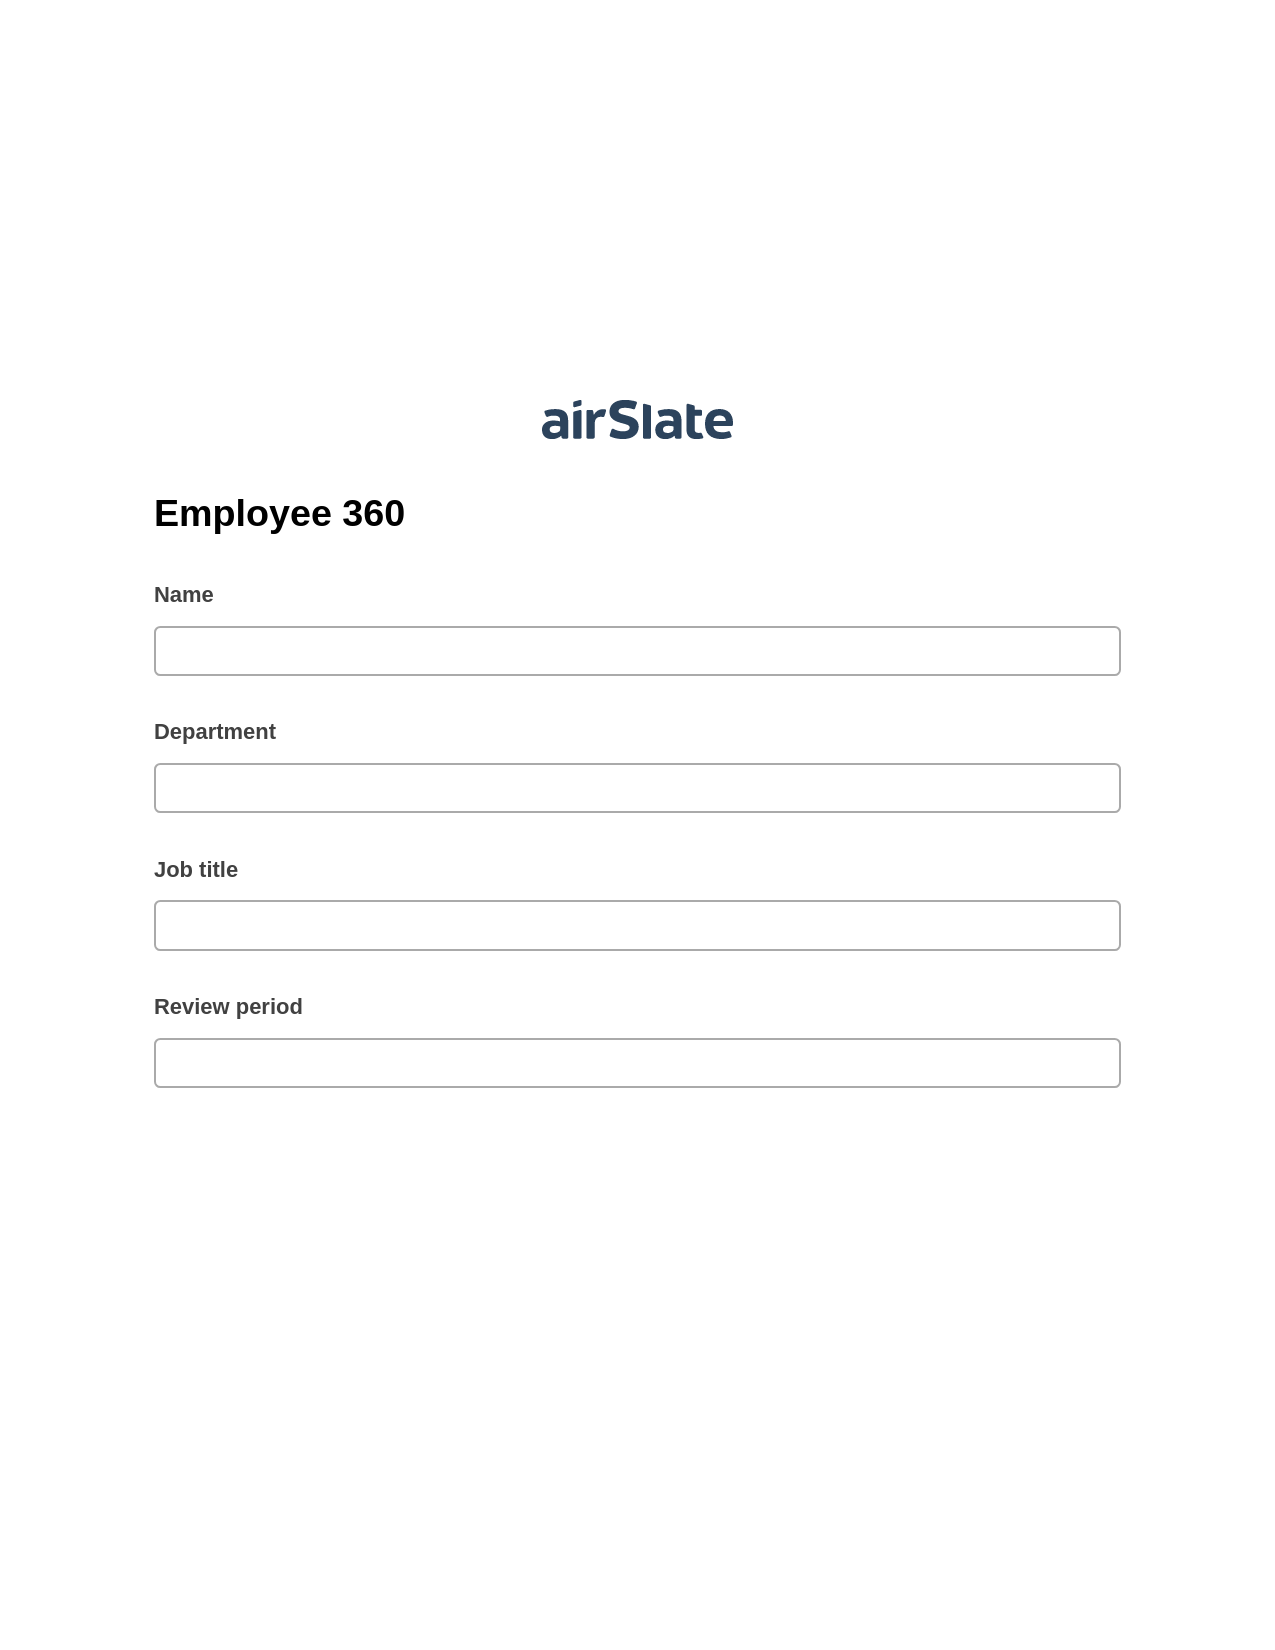 Multirole Employee 360 Pre-fill from CSV File Bot, Remove Slate Bot, Export to Excel 365 Bot